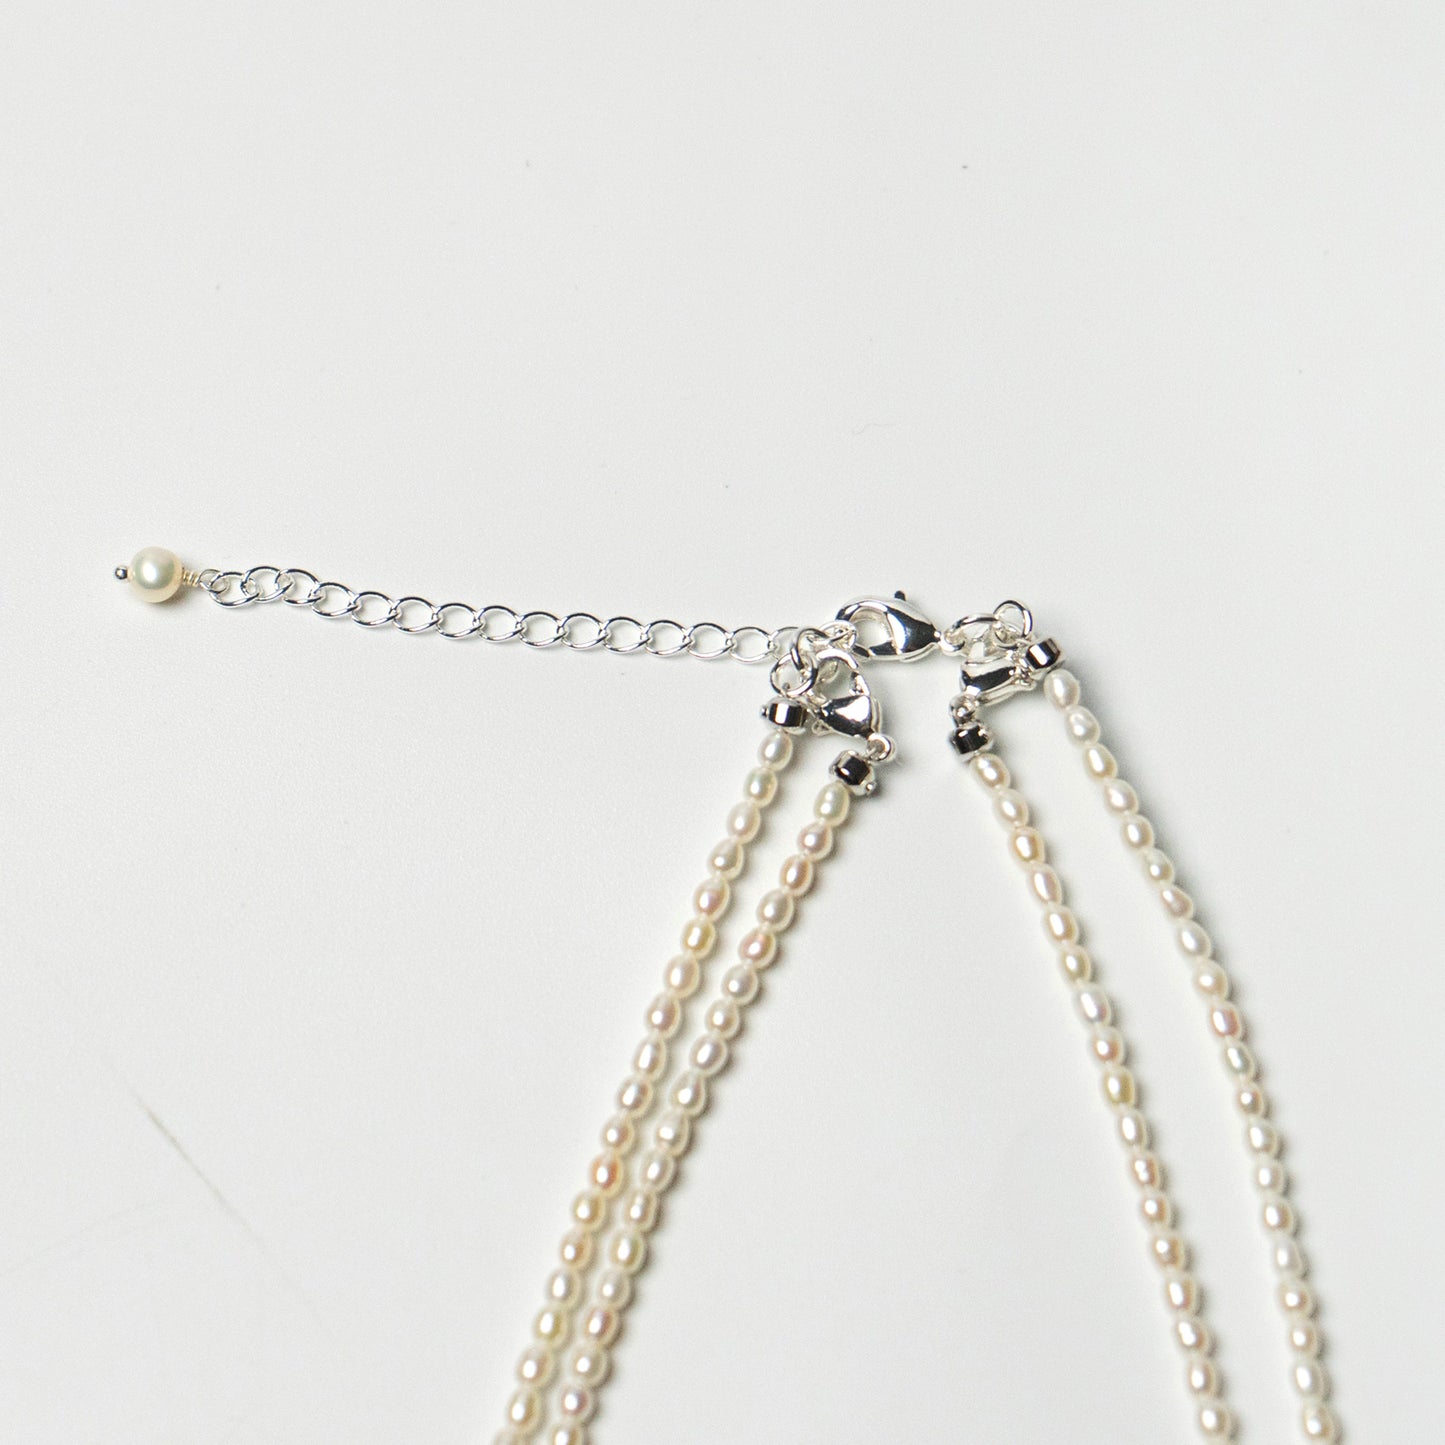 Freshwater pearl 3WAY necklace